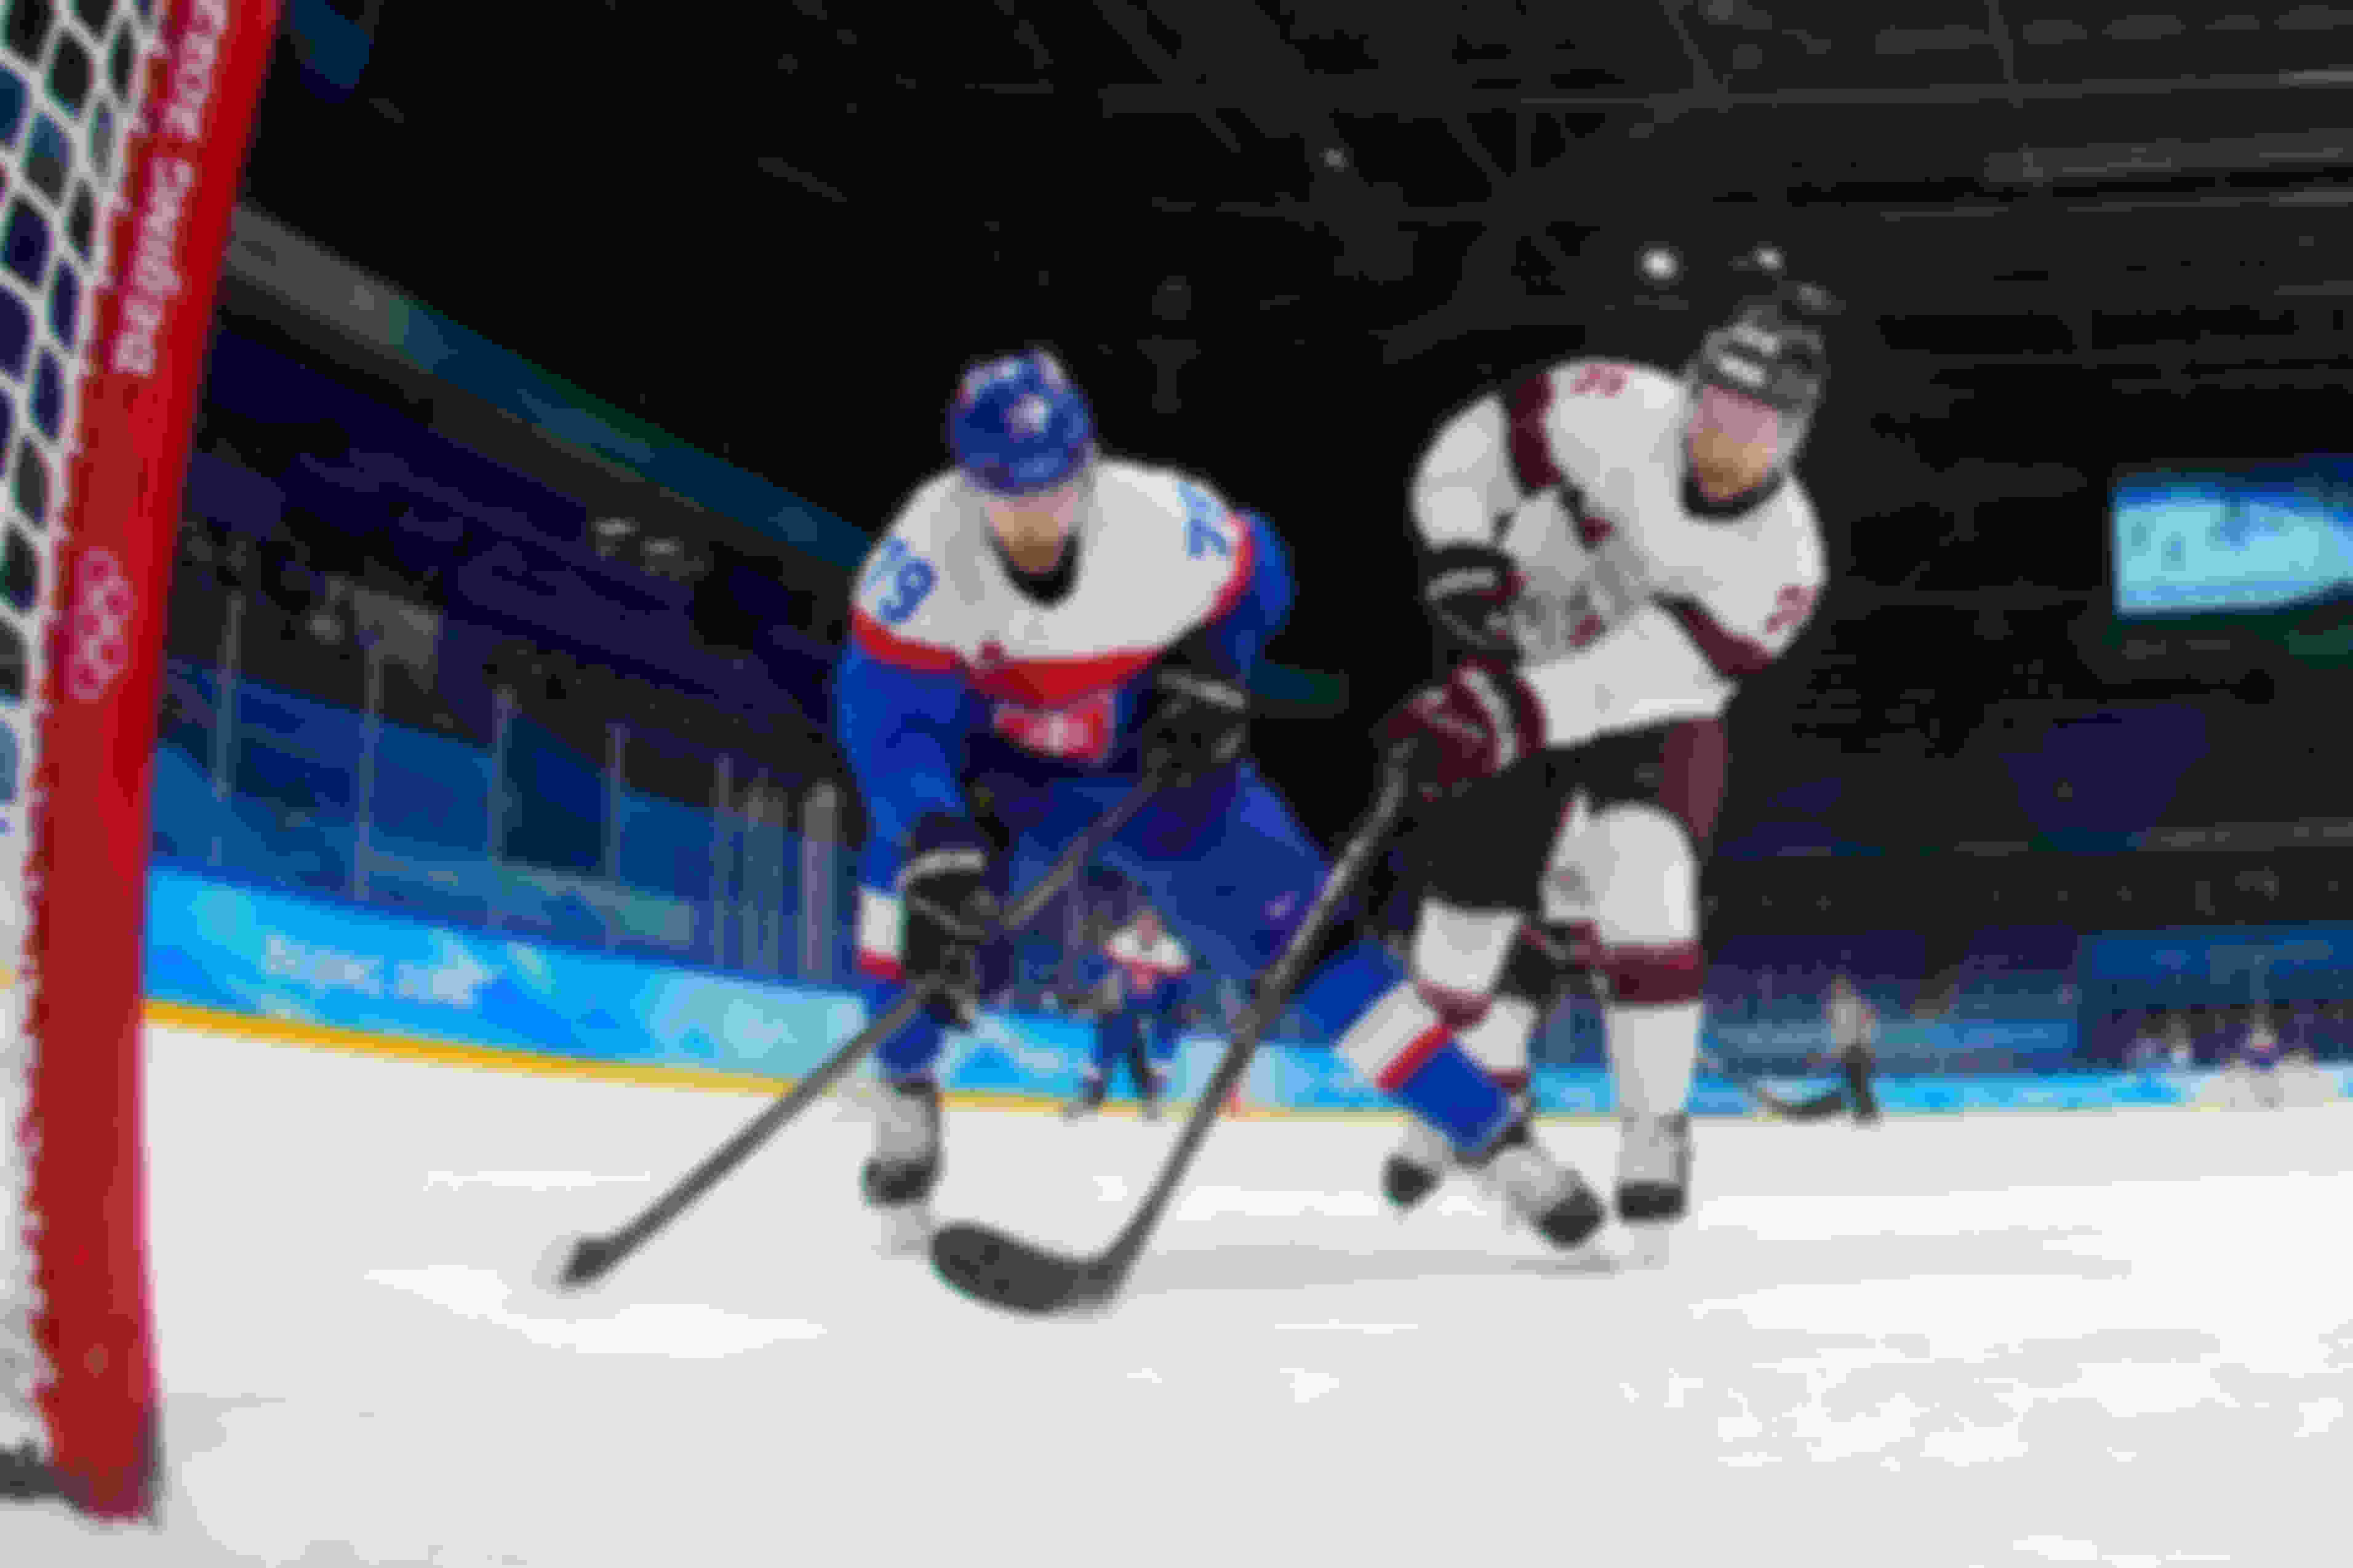 Libor Hudacek #79 of Team Slovakia and Uvis Balinskis #26 of Team Latvia skate in front of the net in the third period